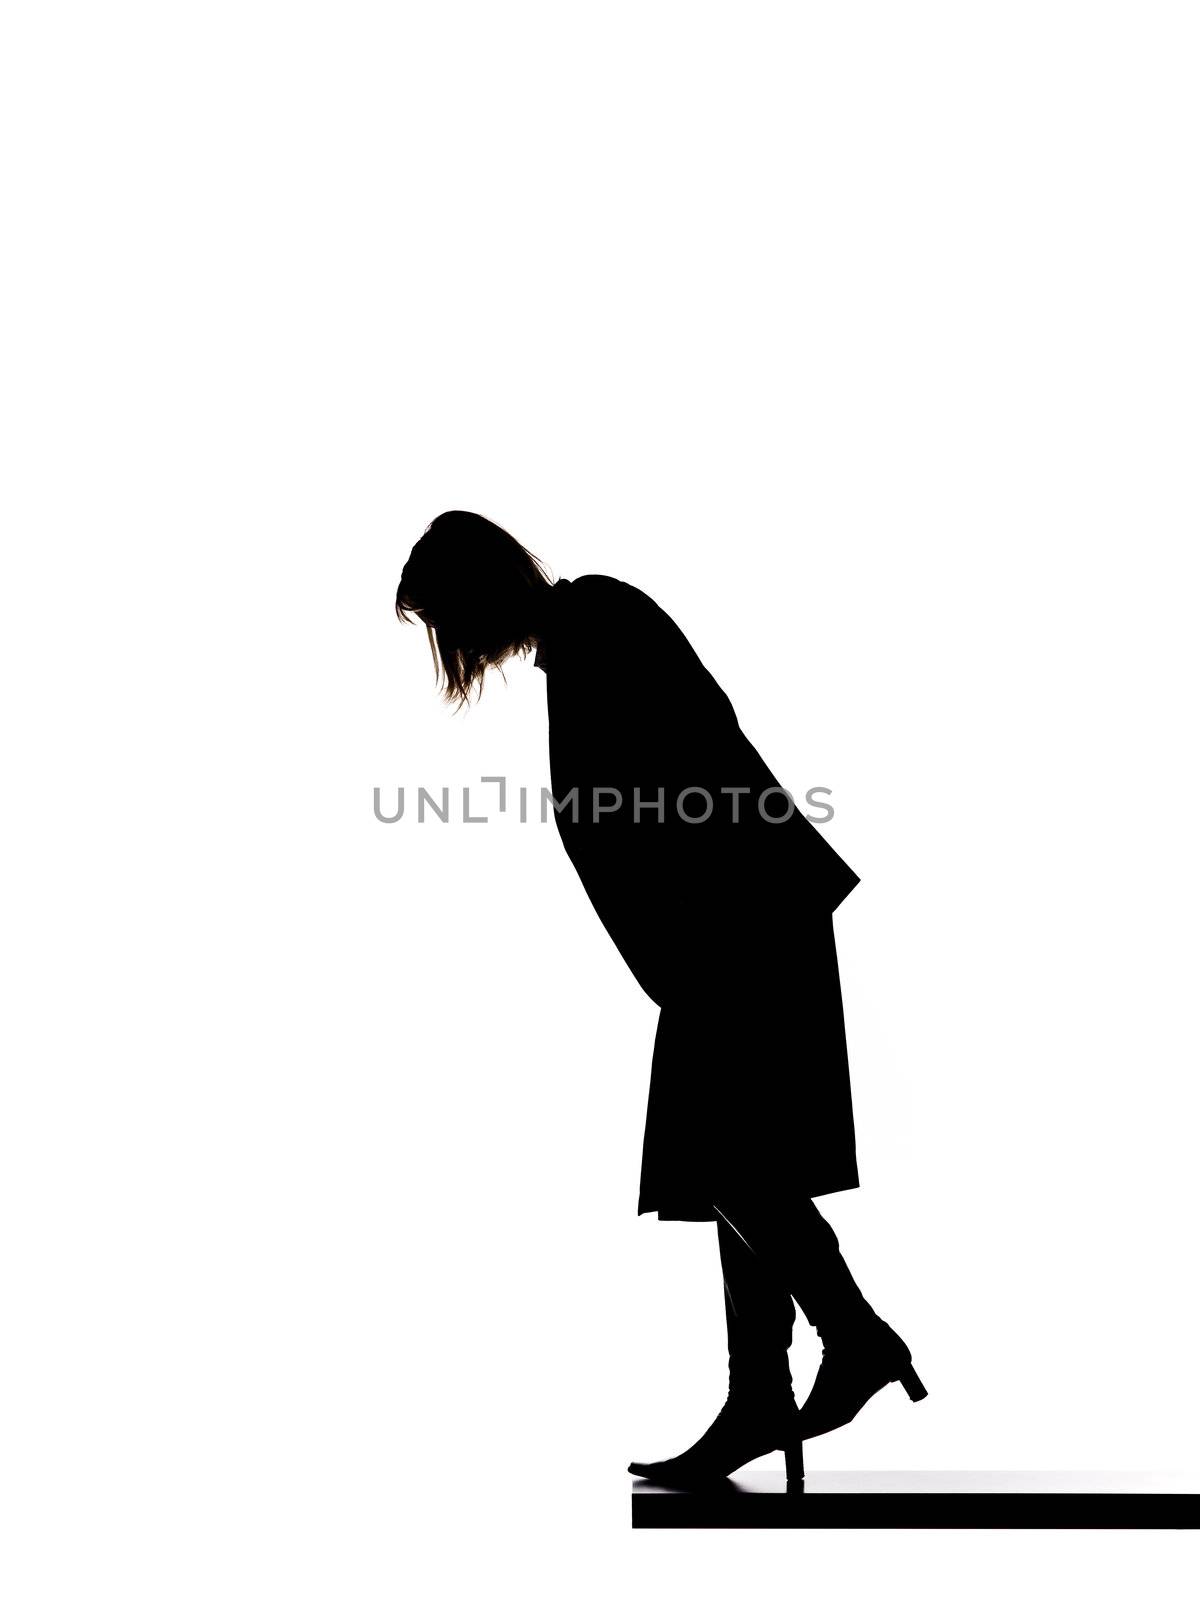 Silhouette of a woman looking down by gemenacom